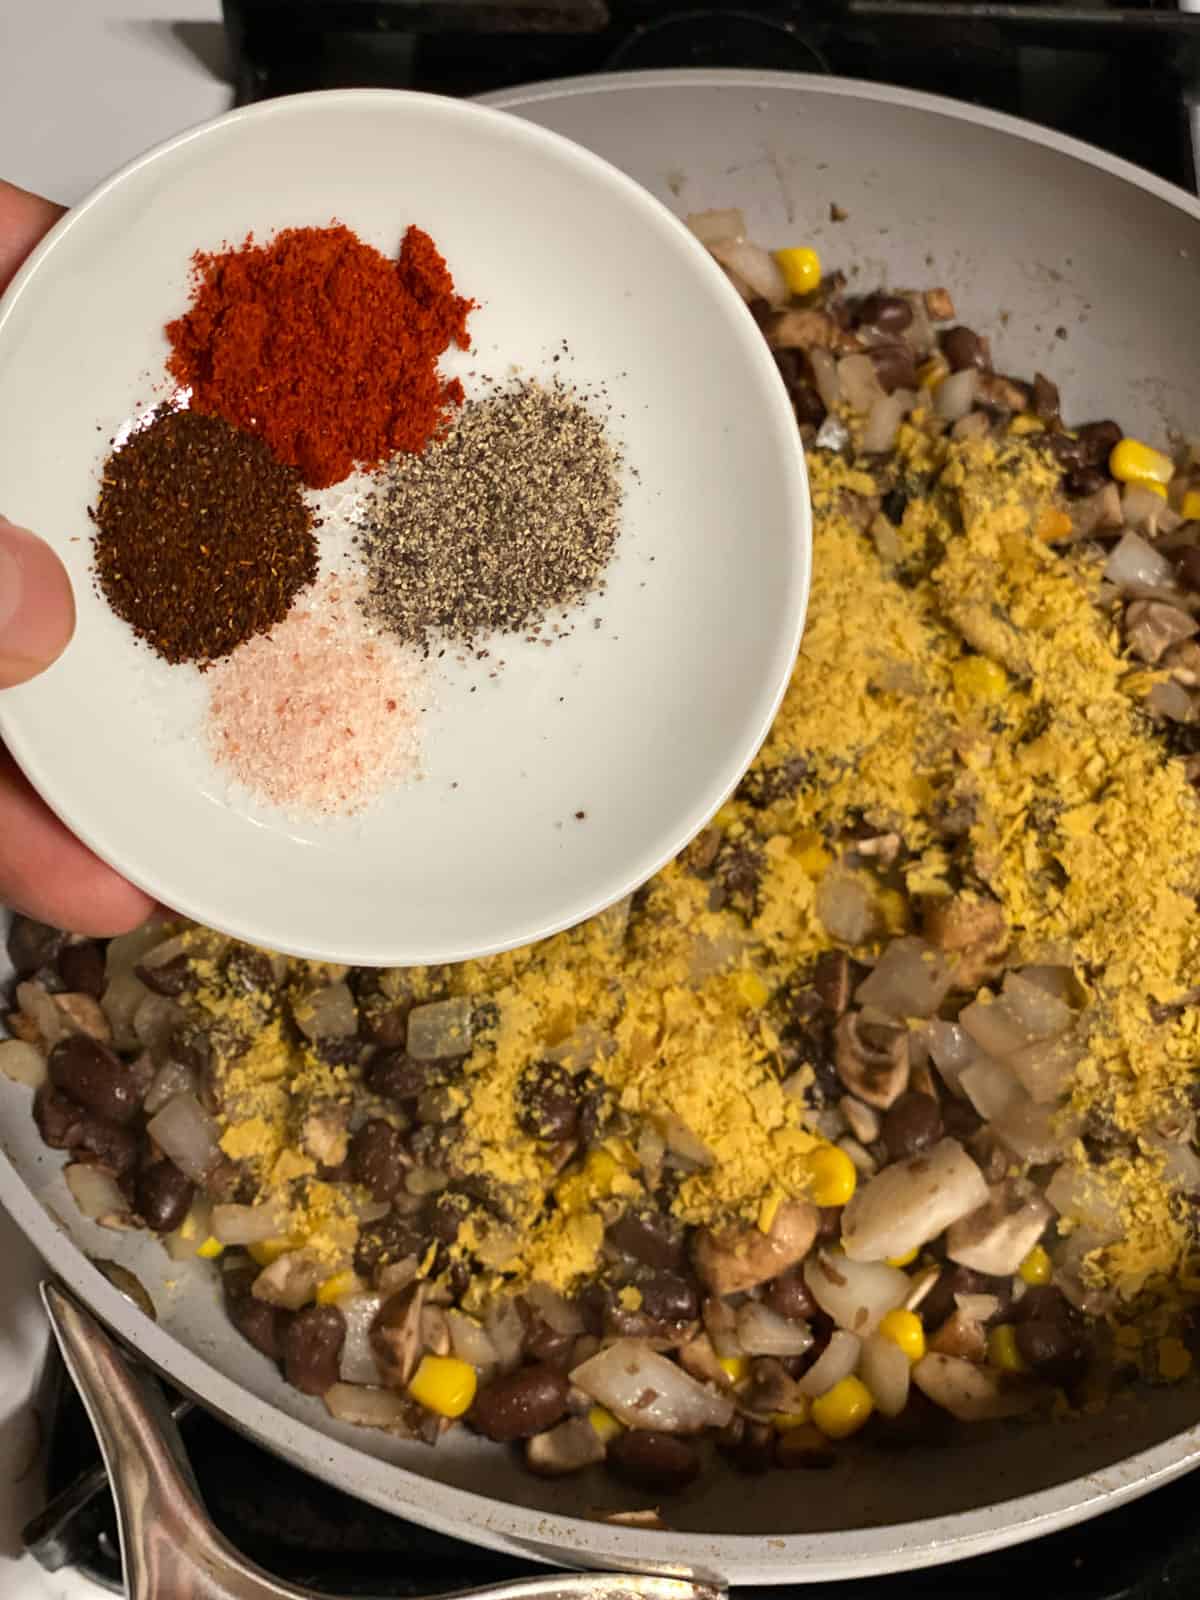 process shot of spices being added to bowl